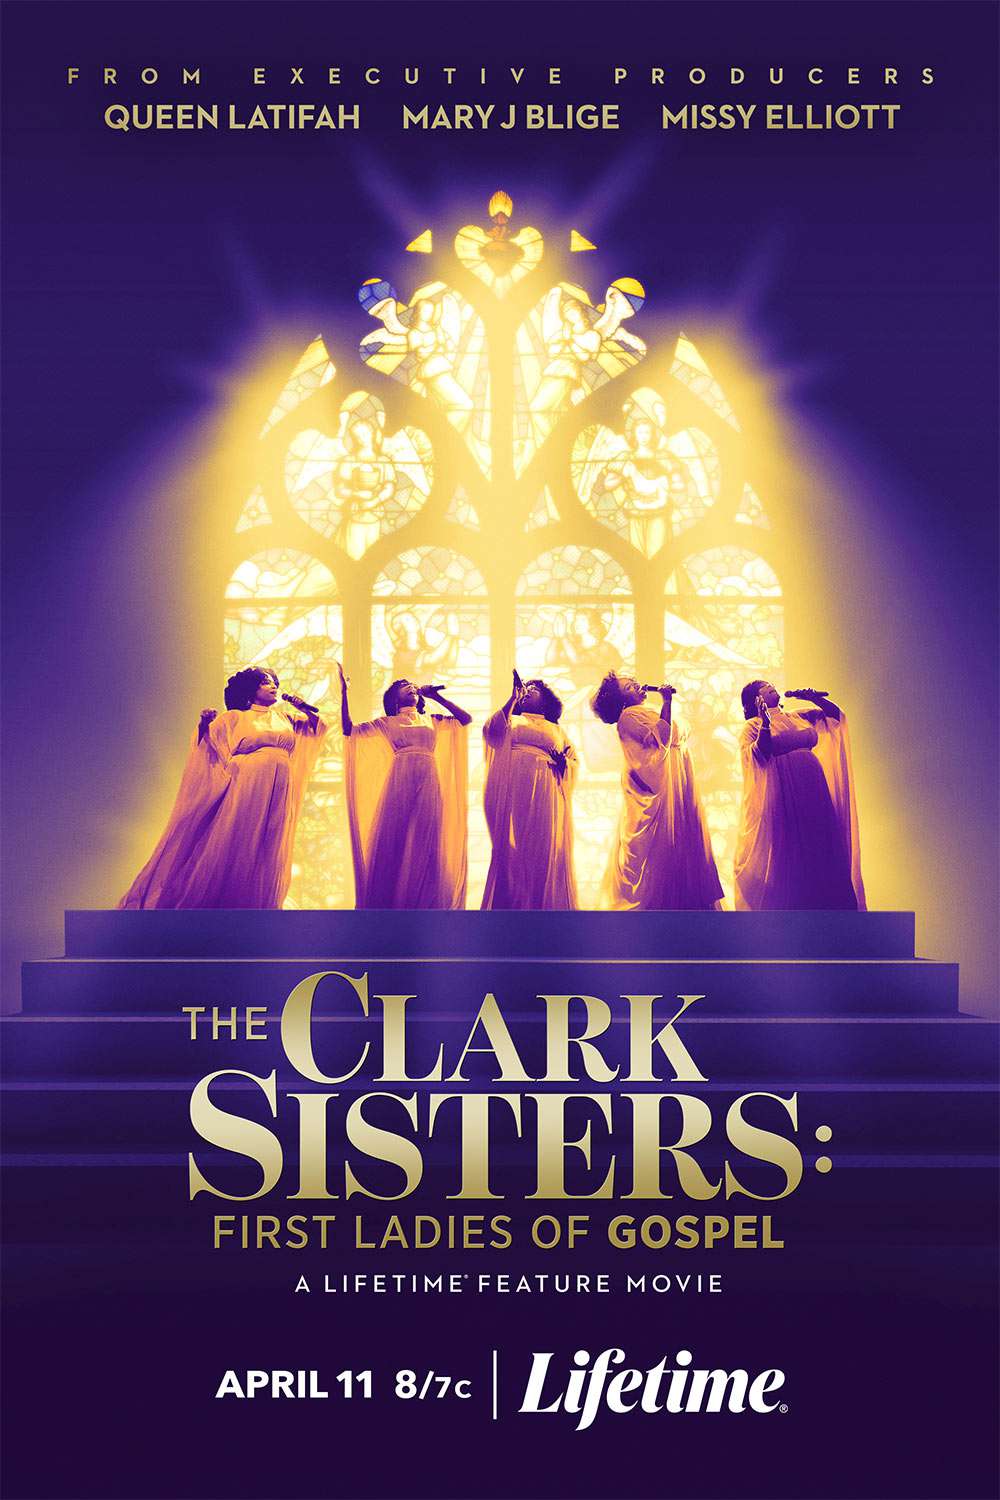 "The Clark Sisters: First Ladies of Gospel Cast